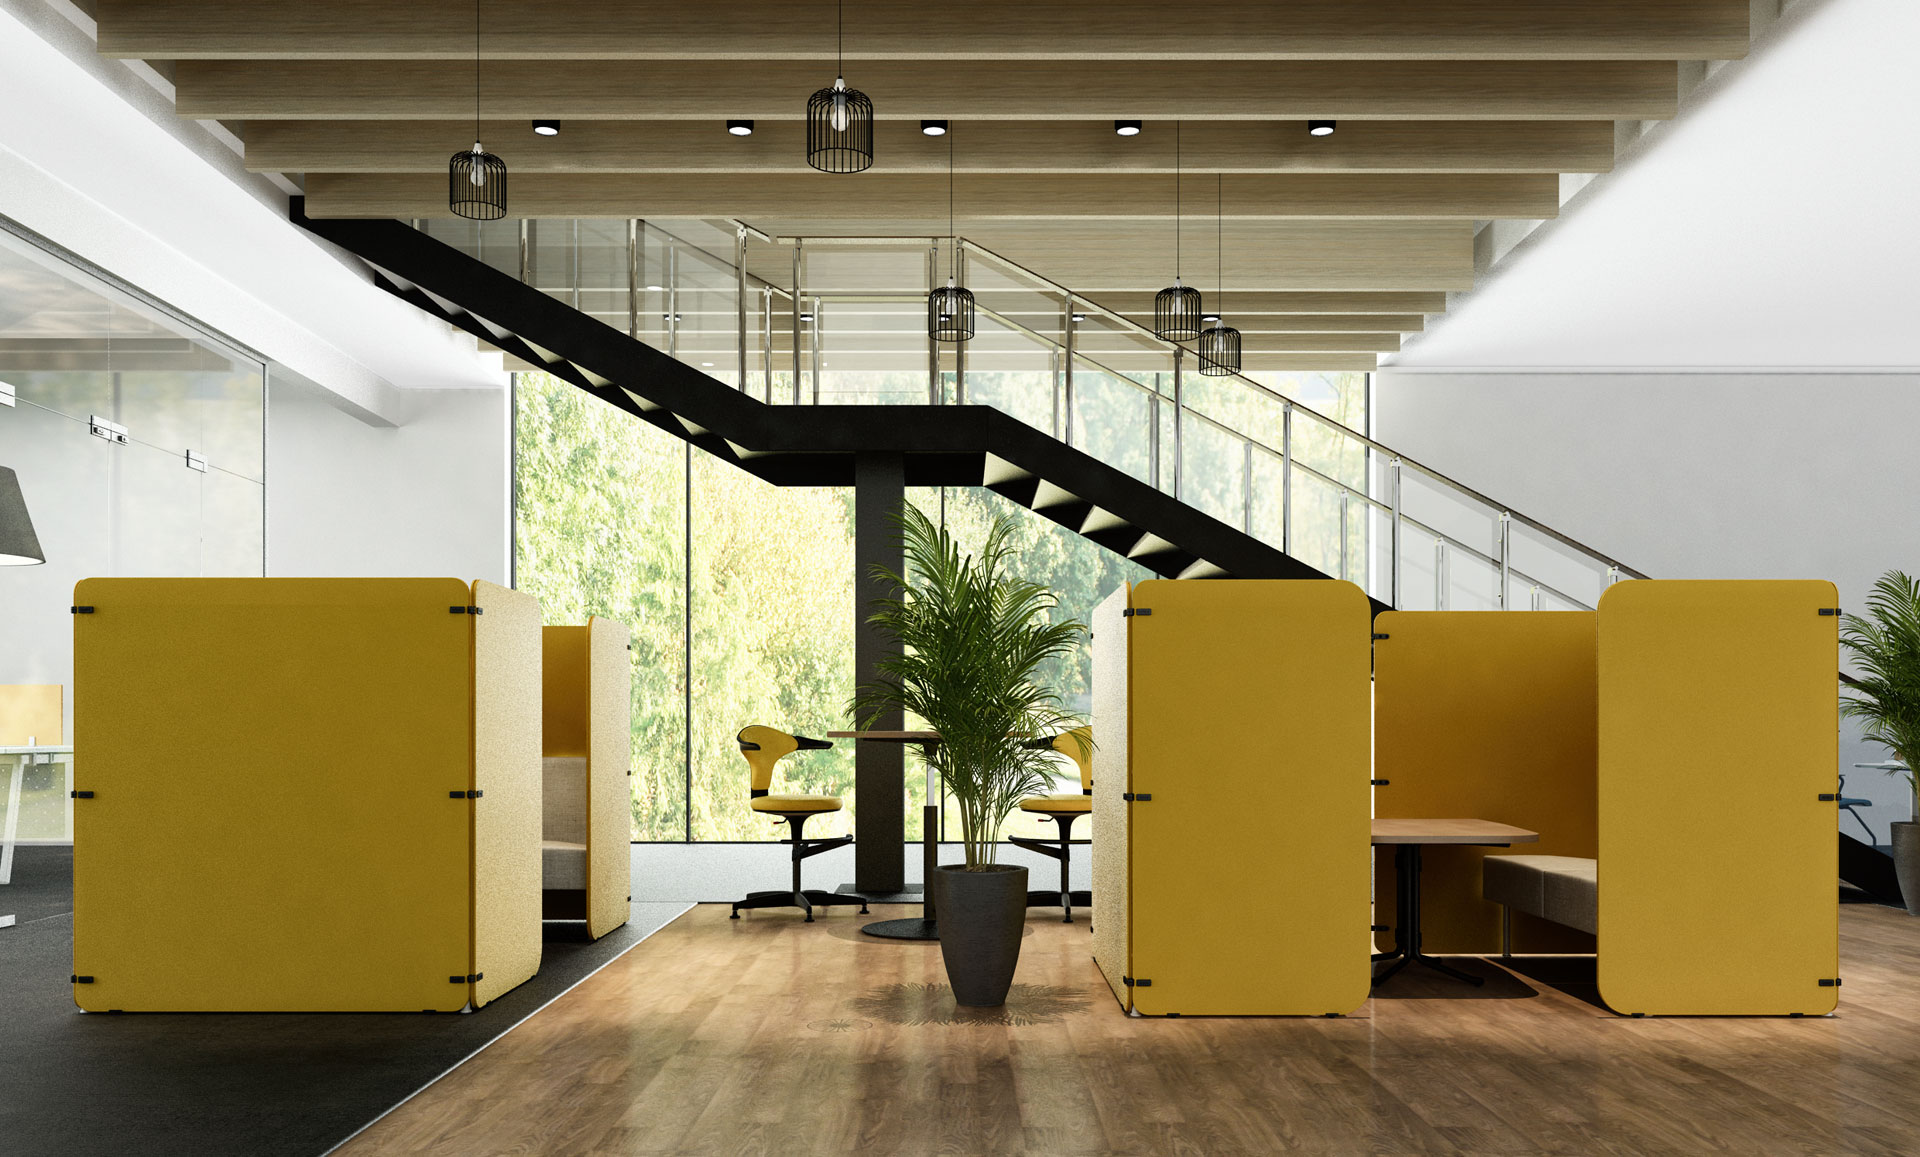 Radial Pod Sit in yellow fabric at a waiting area in the lobby